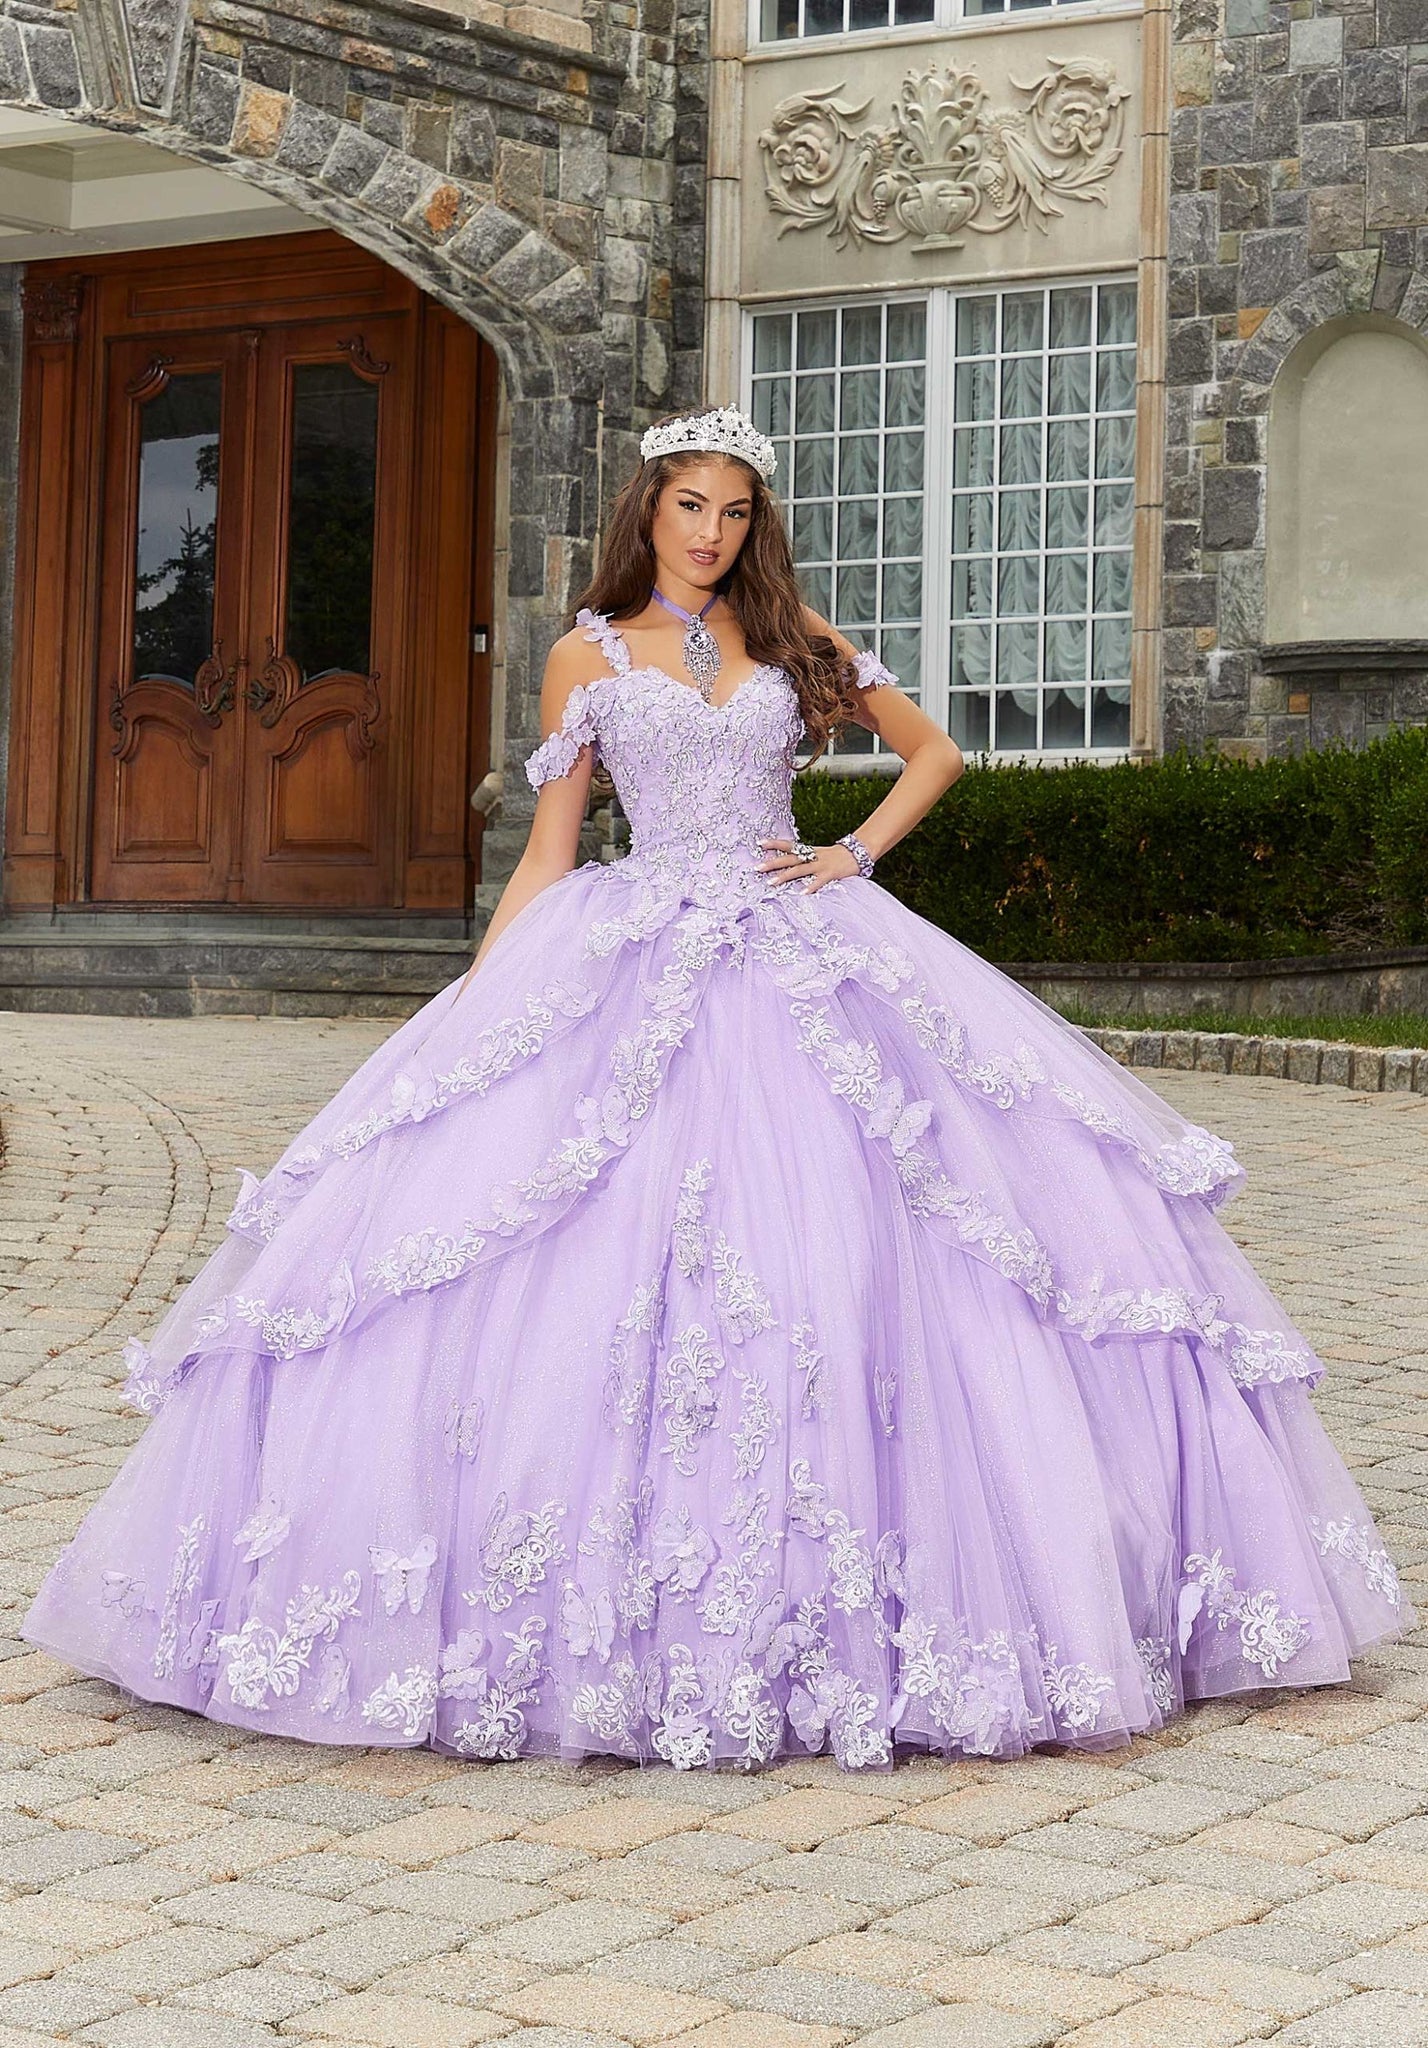 Metallic Embroidered Quinceañera Dress with Three-Dimensional Butterflies